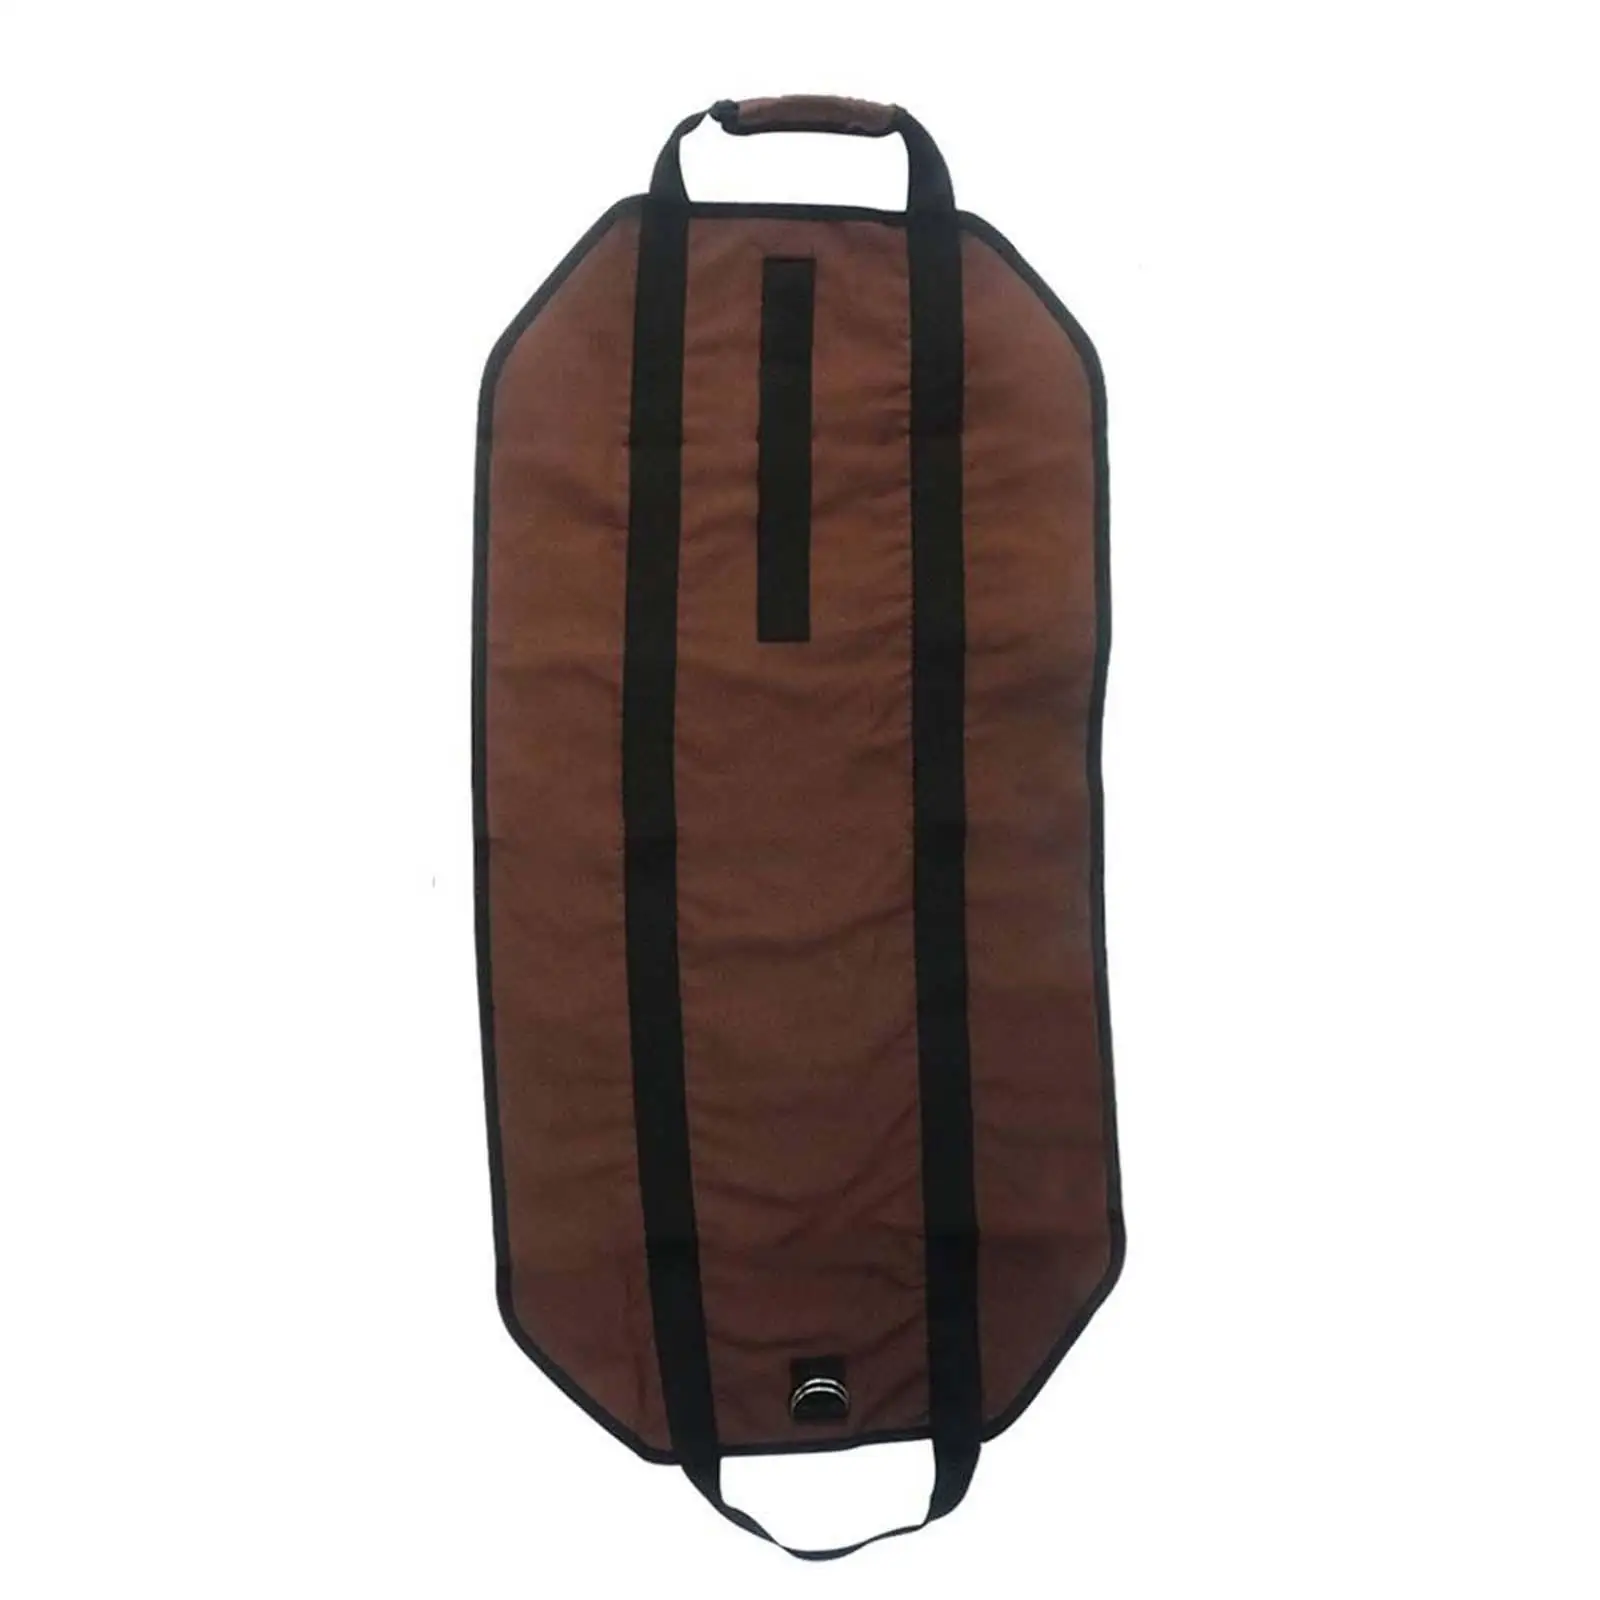 Portable Firewood Carrier Bag Log Tote Handbag Holder Rack Fireplace Fire Wood Large Capacity for Barbecue Fire Pit Picnic BBQ